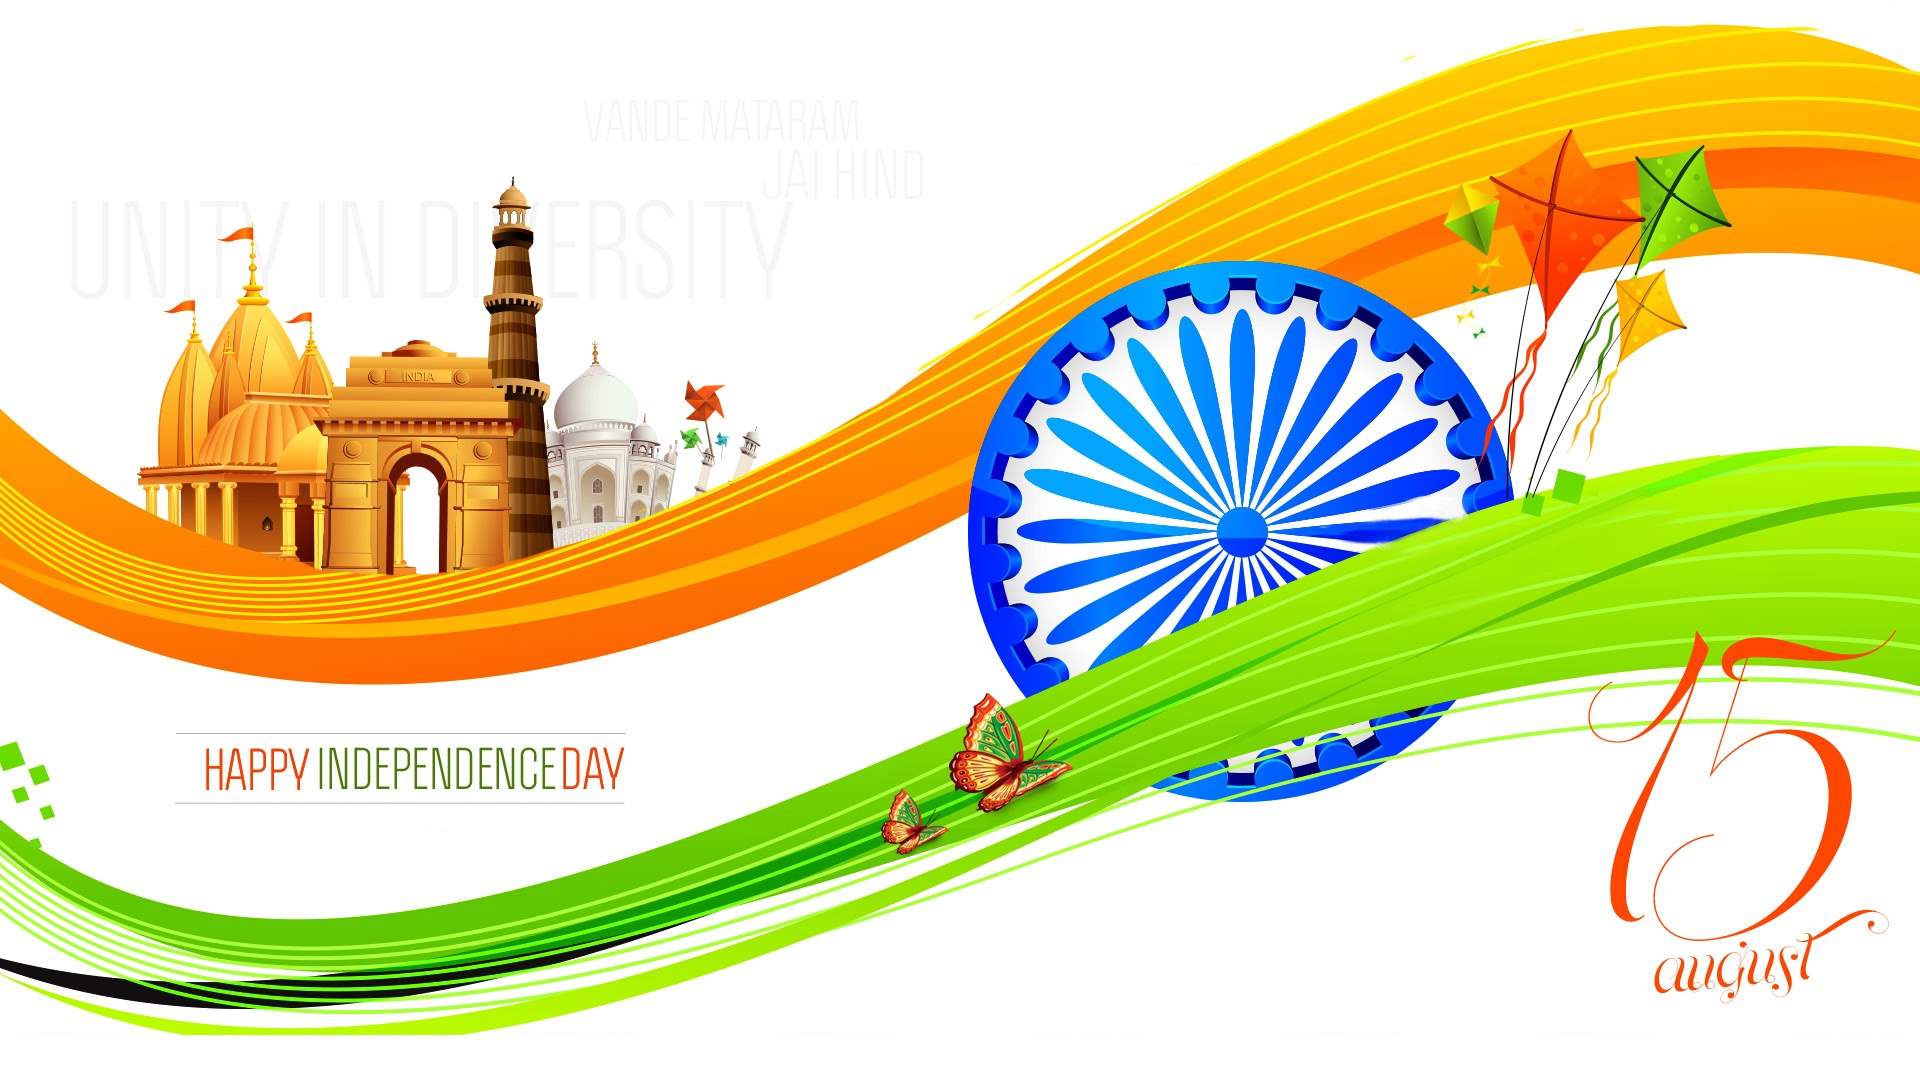  india independence day 2015 wallpapers india independence day indian